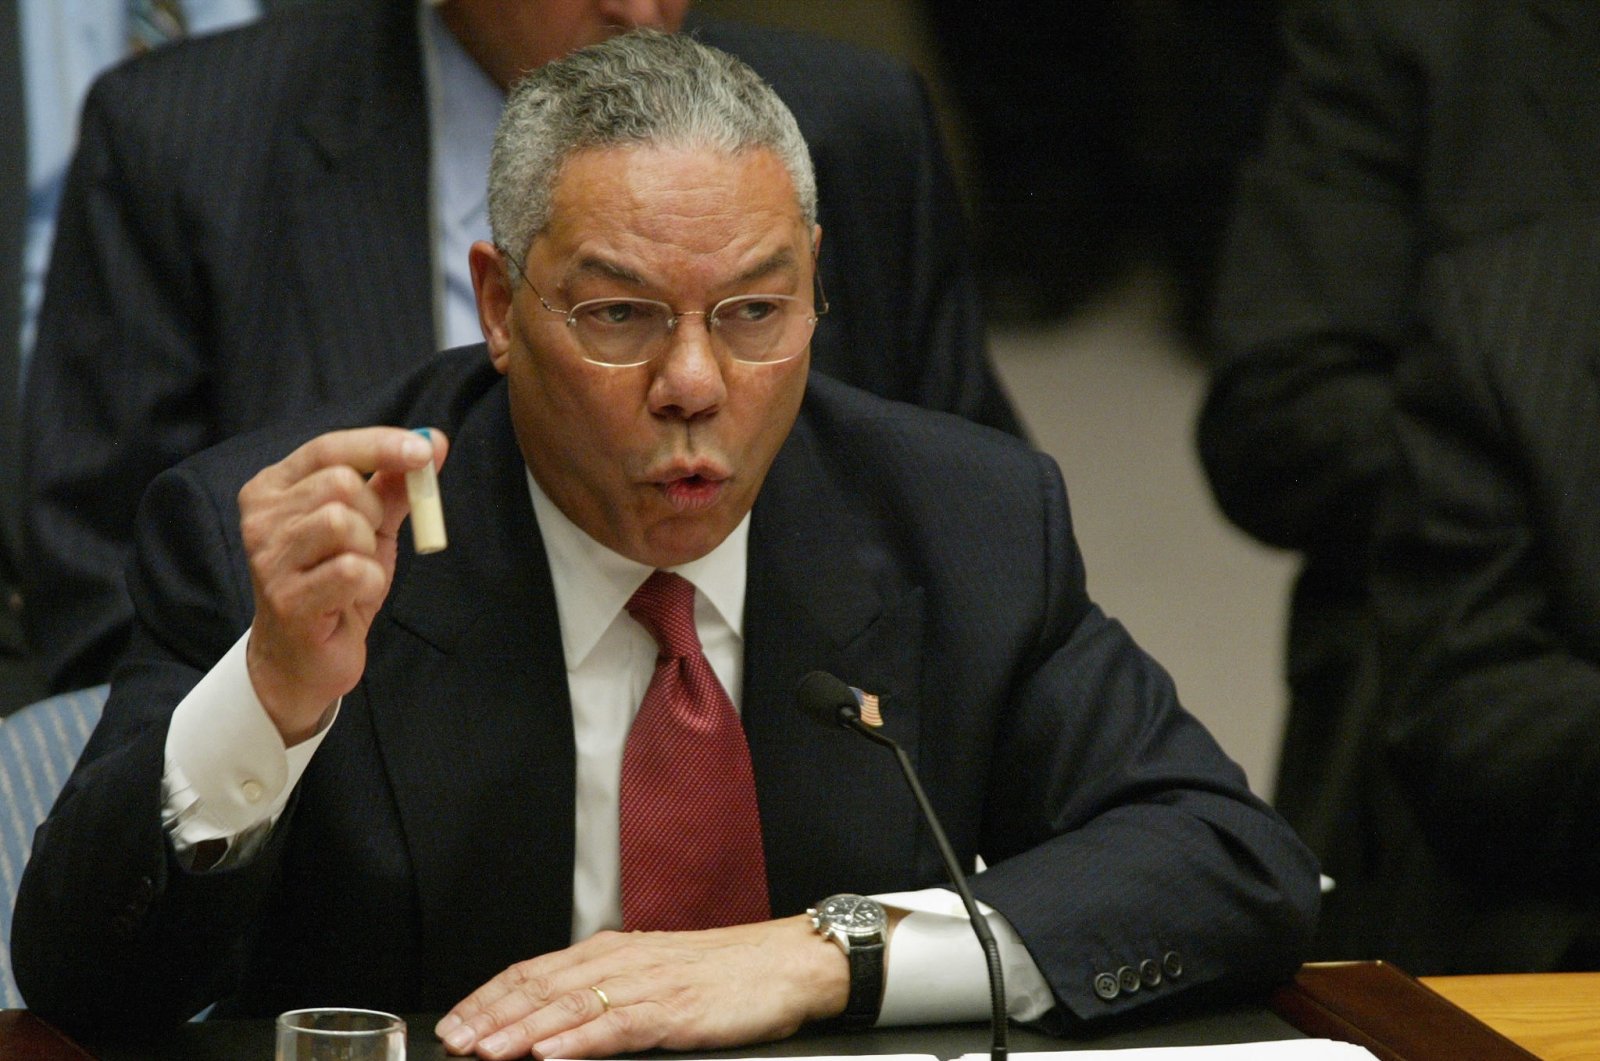 In this file photo taken on Feb. 5, 2003 US Secretary of State Colin Powell holds up a vial that he said was the size that could be used to hold anthrax as he addresses the United Nations Security Council (UNSC) at the U.N. in New York. (AFP Photo)